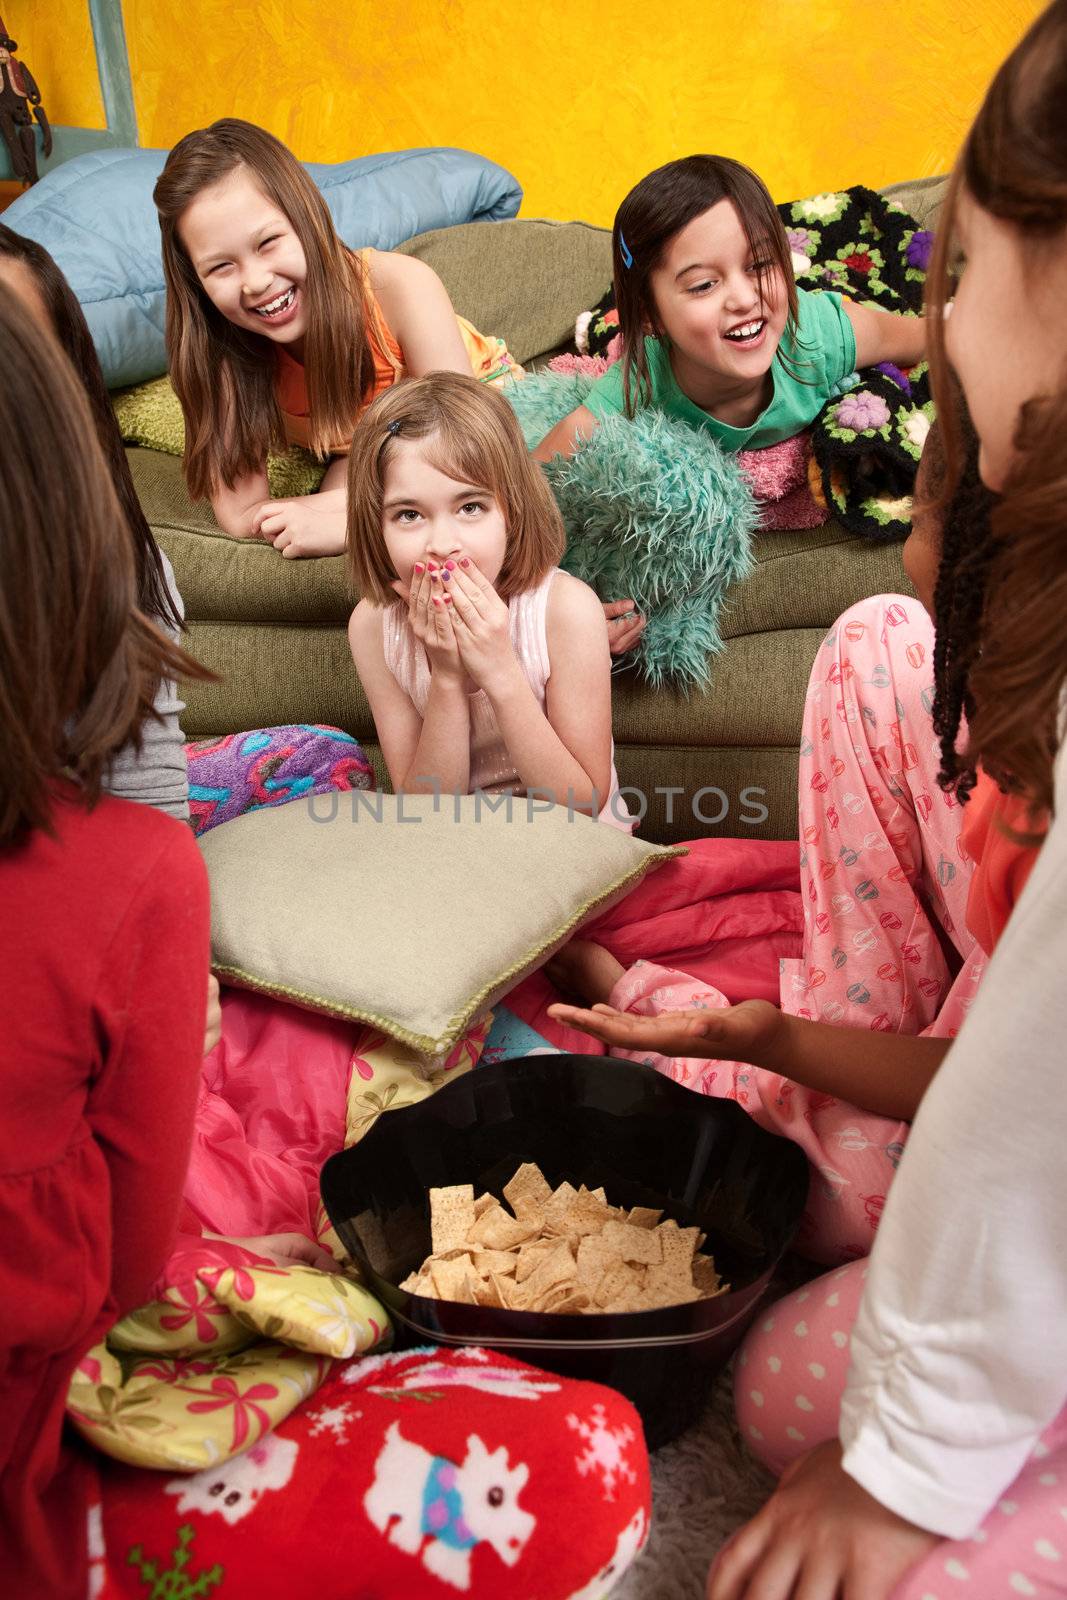 Little girls giggle and eat snacks at a sleepover